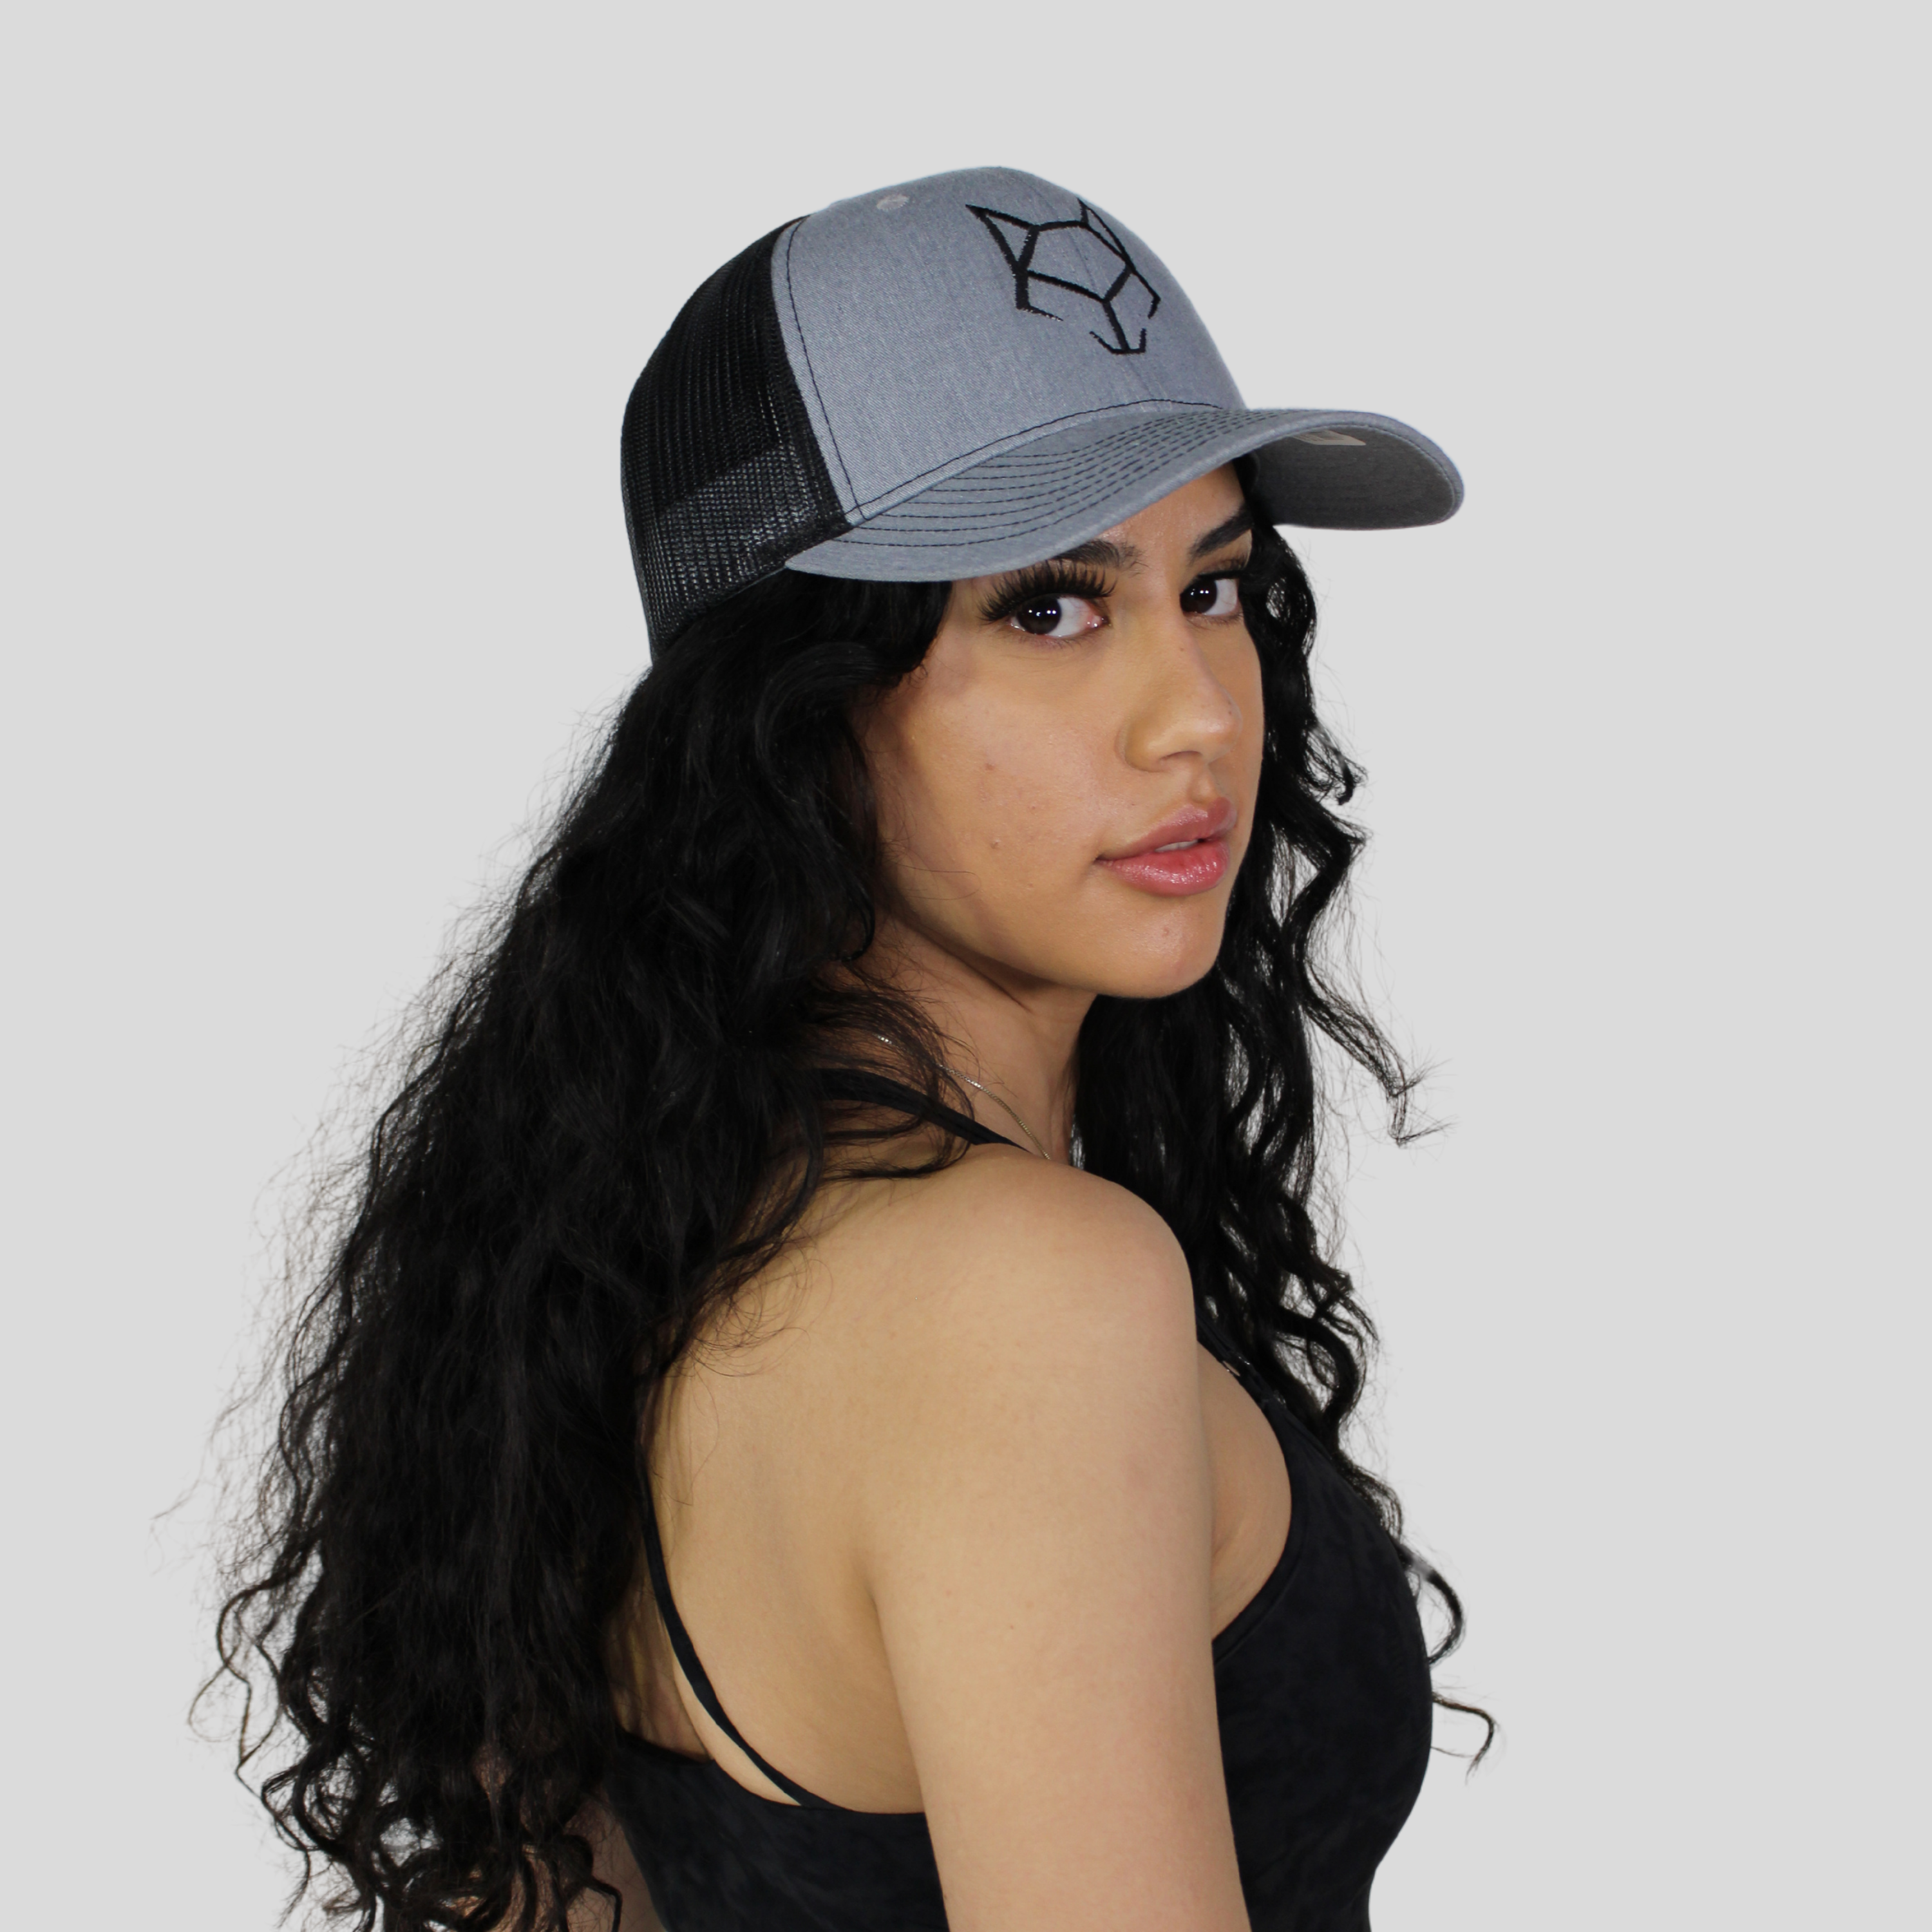 The curved brim and elastic stretch Flex fit crown comfort and protection to your head; Ventilation holes at the top of the crown keep your head cool while move at the skatepark, or on the way to class, work, or to hangout with friends.